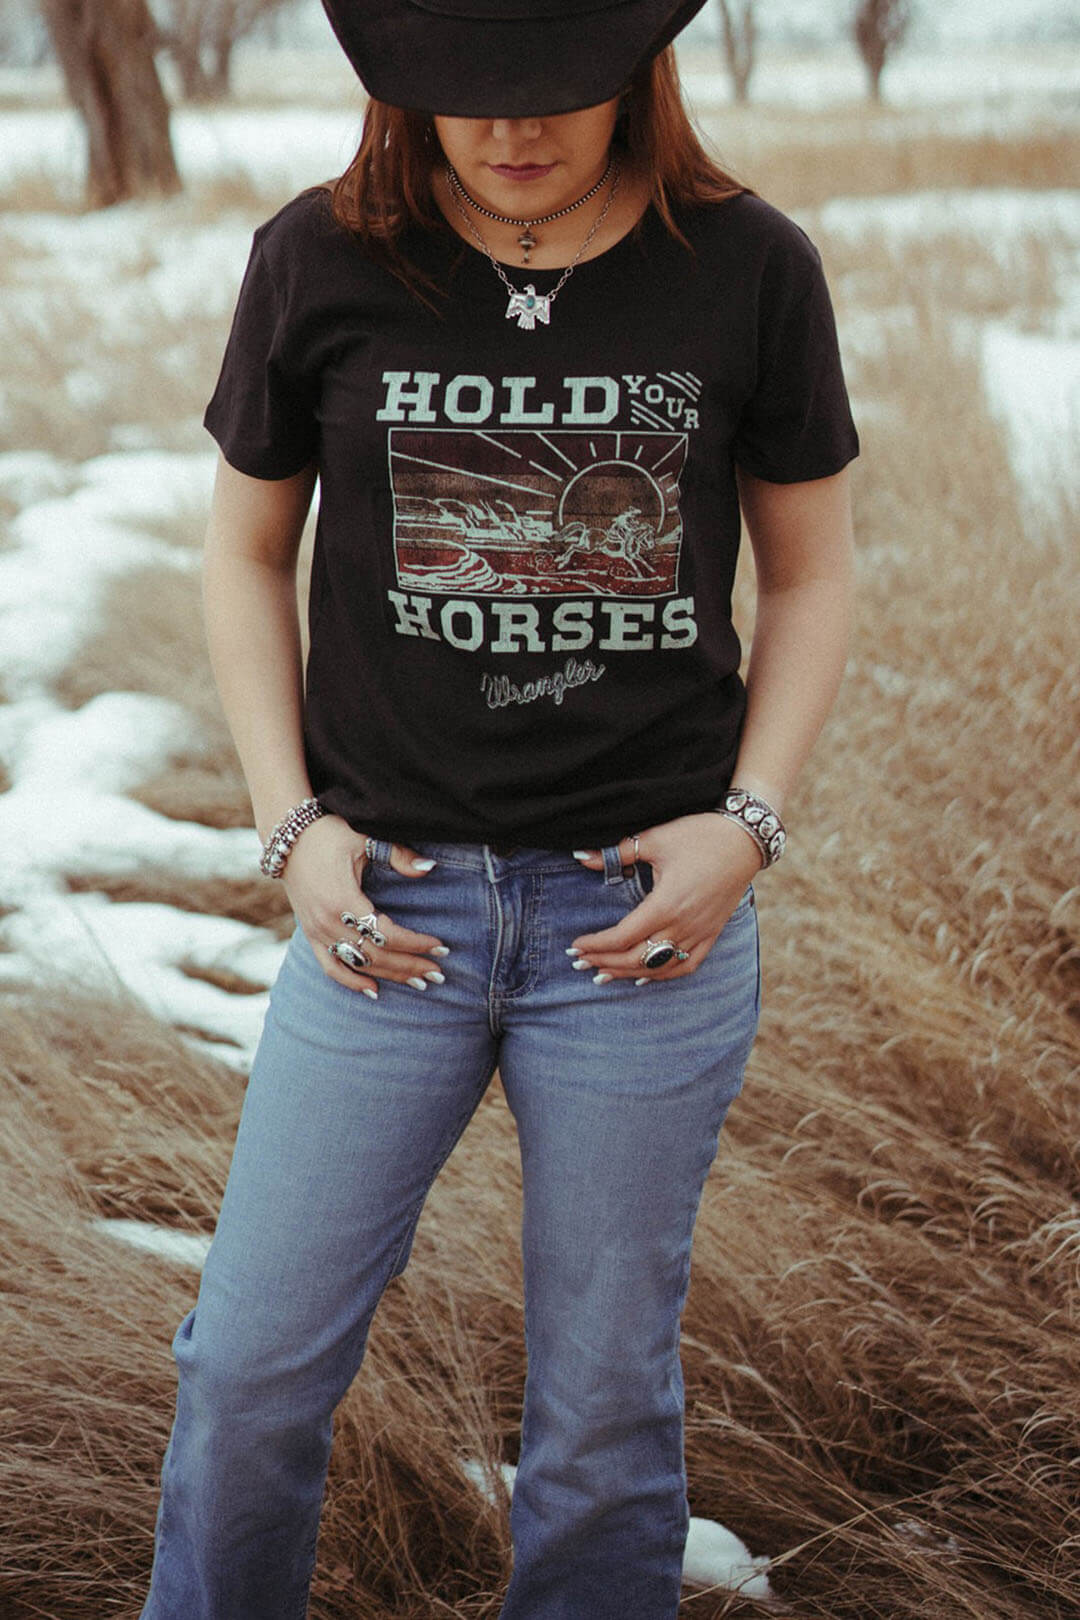 Woman modeling the wrangler graphic tee with the words "Hold Your Horses"  